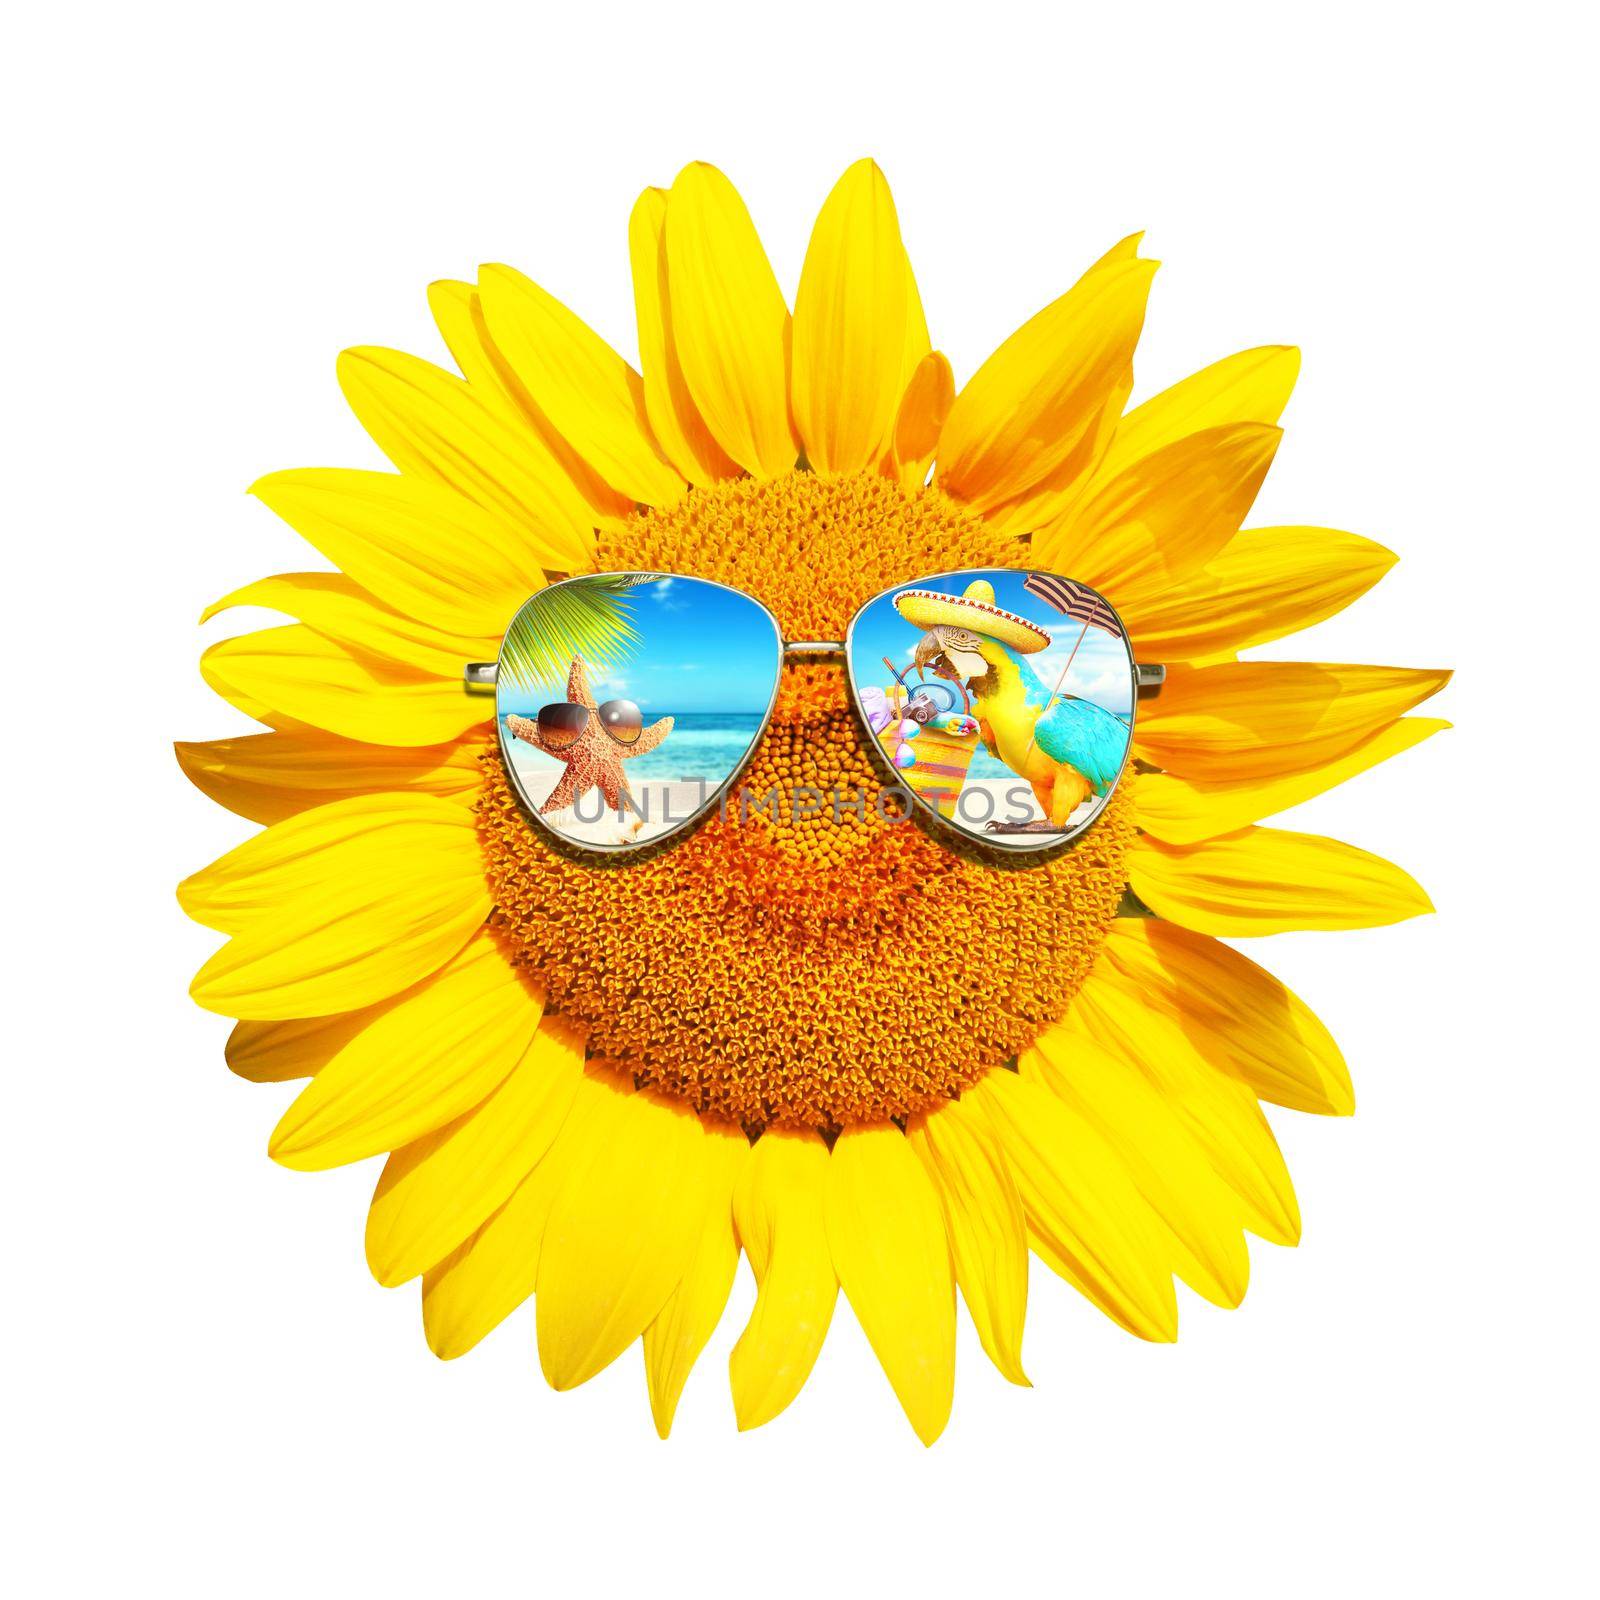 Isolated sunflower with sunglasses and happy face